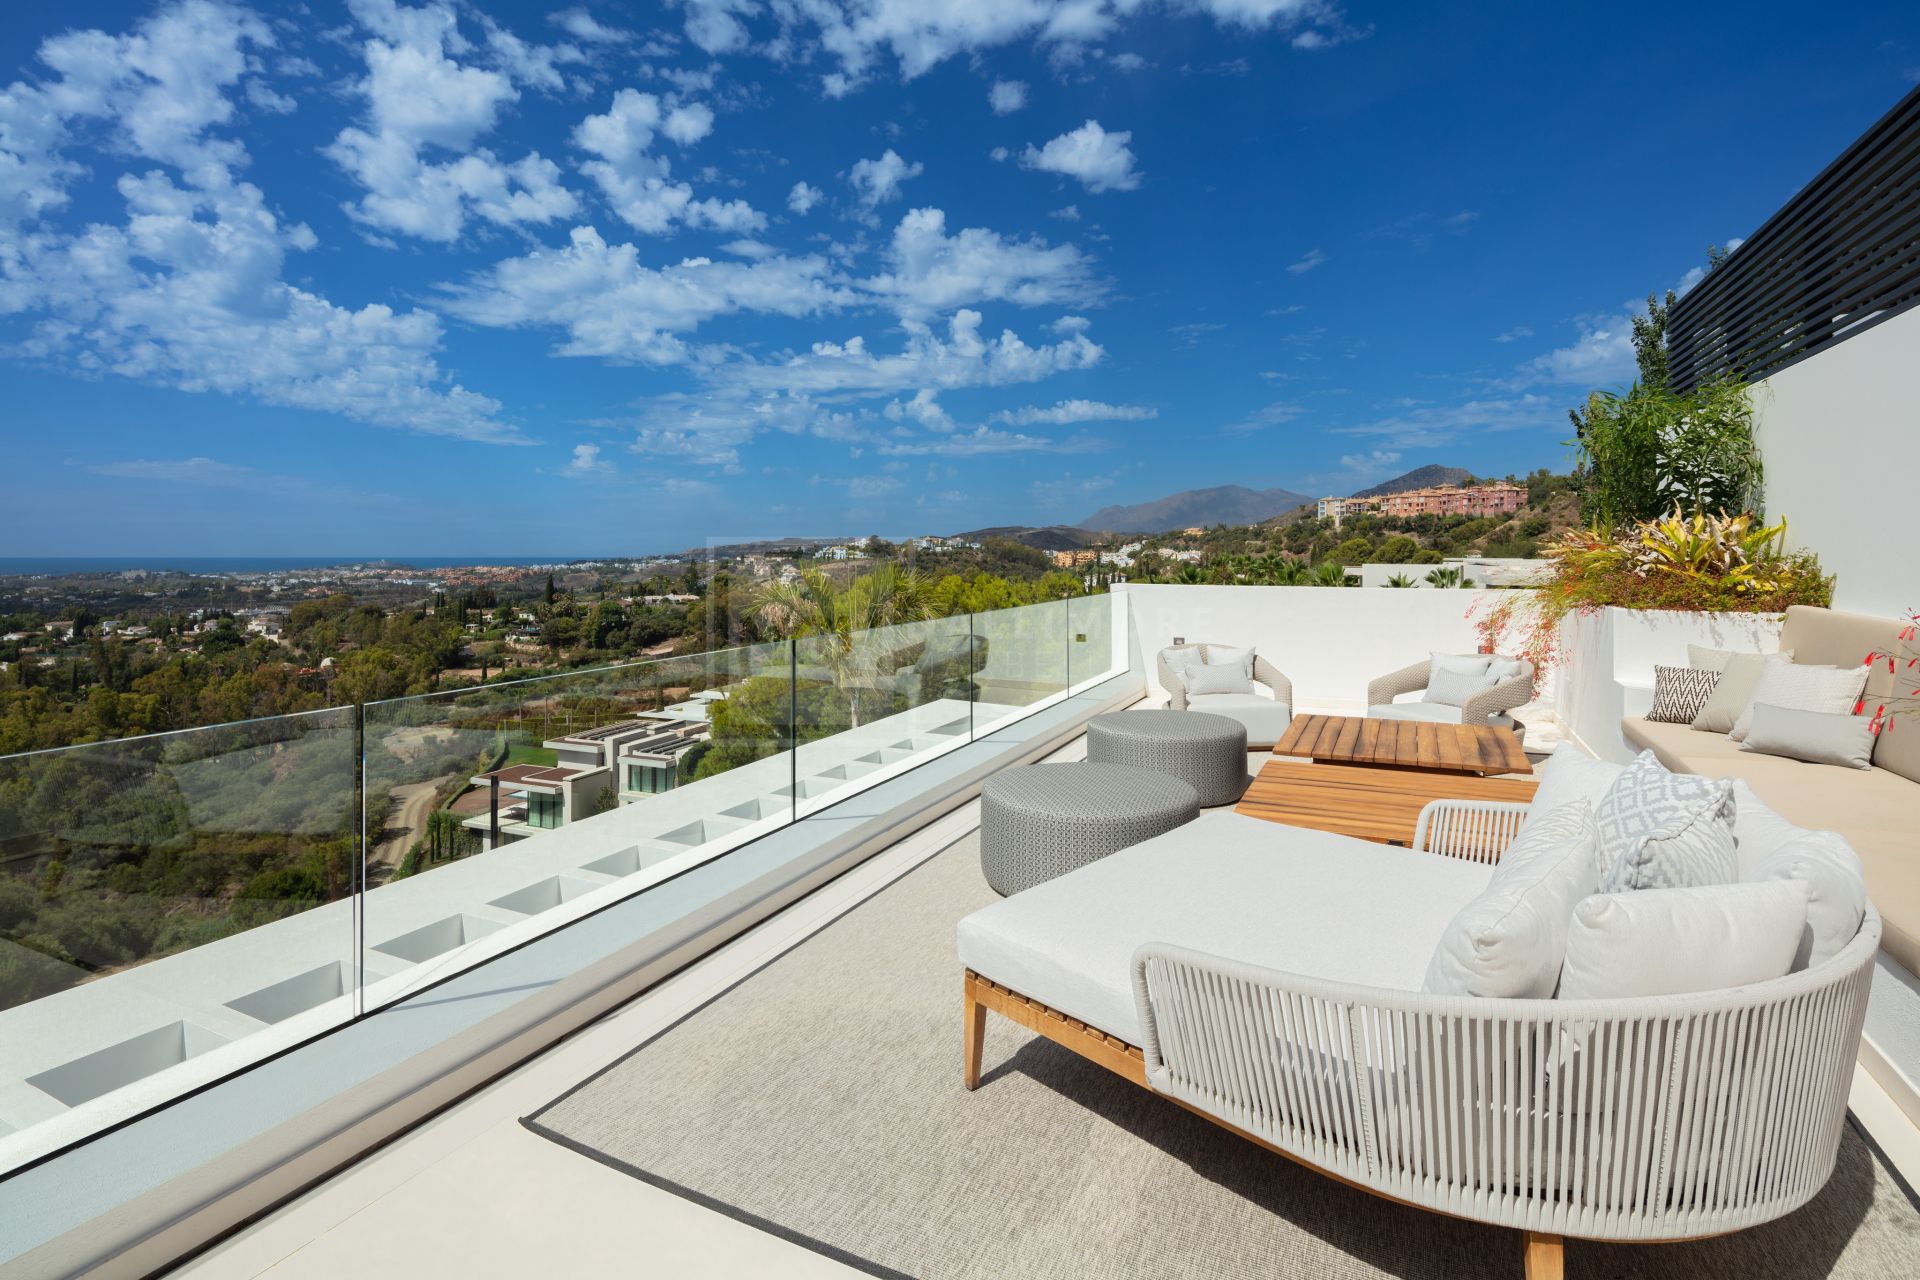 EXQUISITE MODERN VILLA WITH PANORAMIC VIEWS IN PRESTIGIOUS GATED COMMUNITY